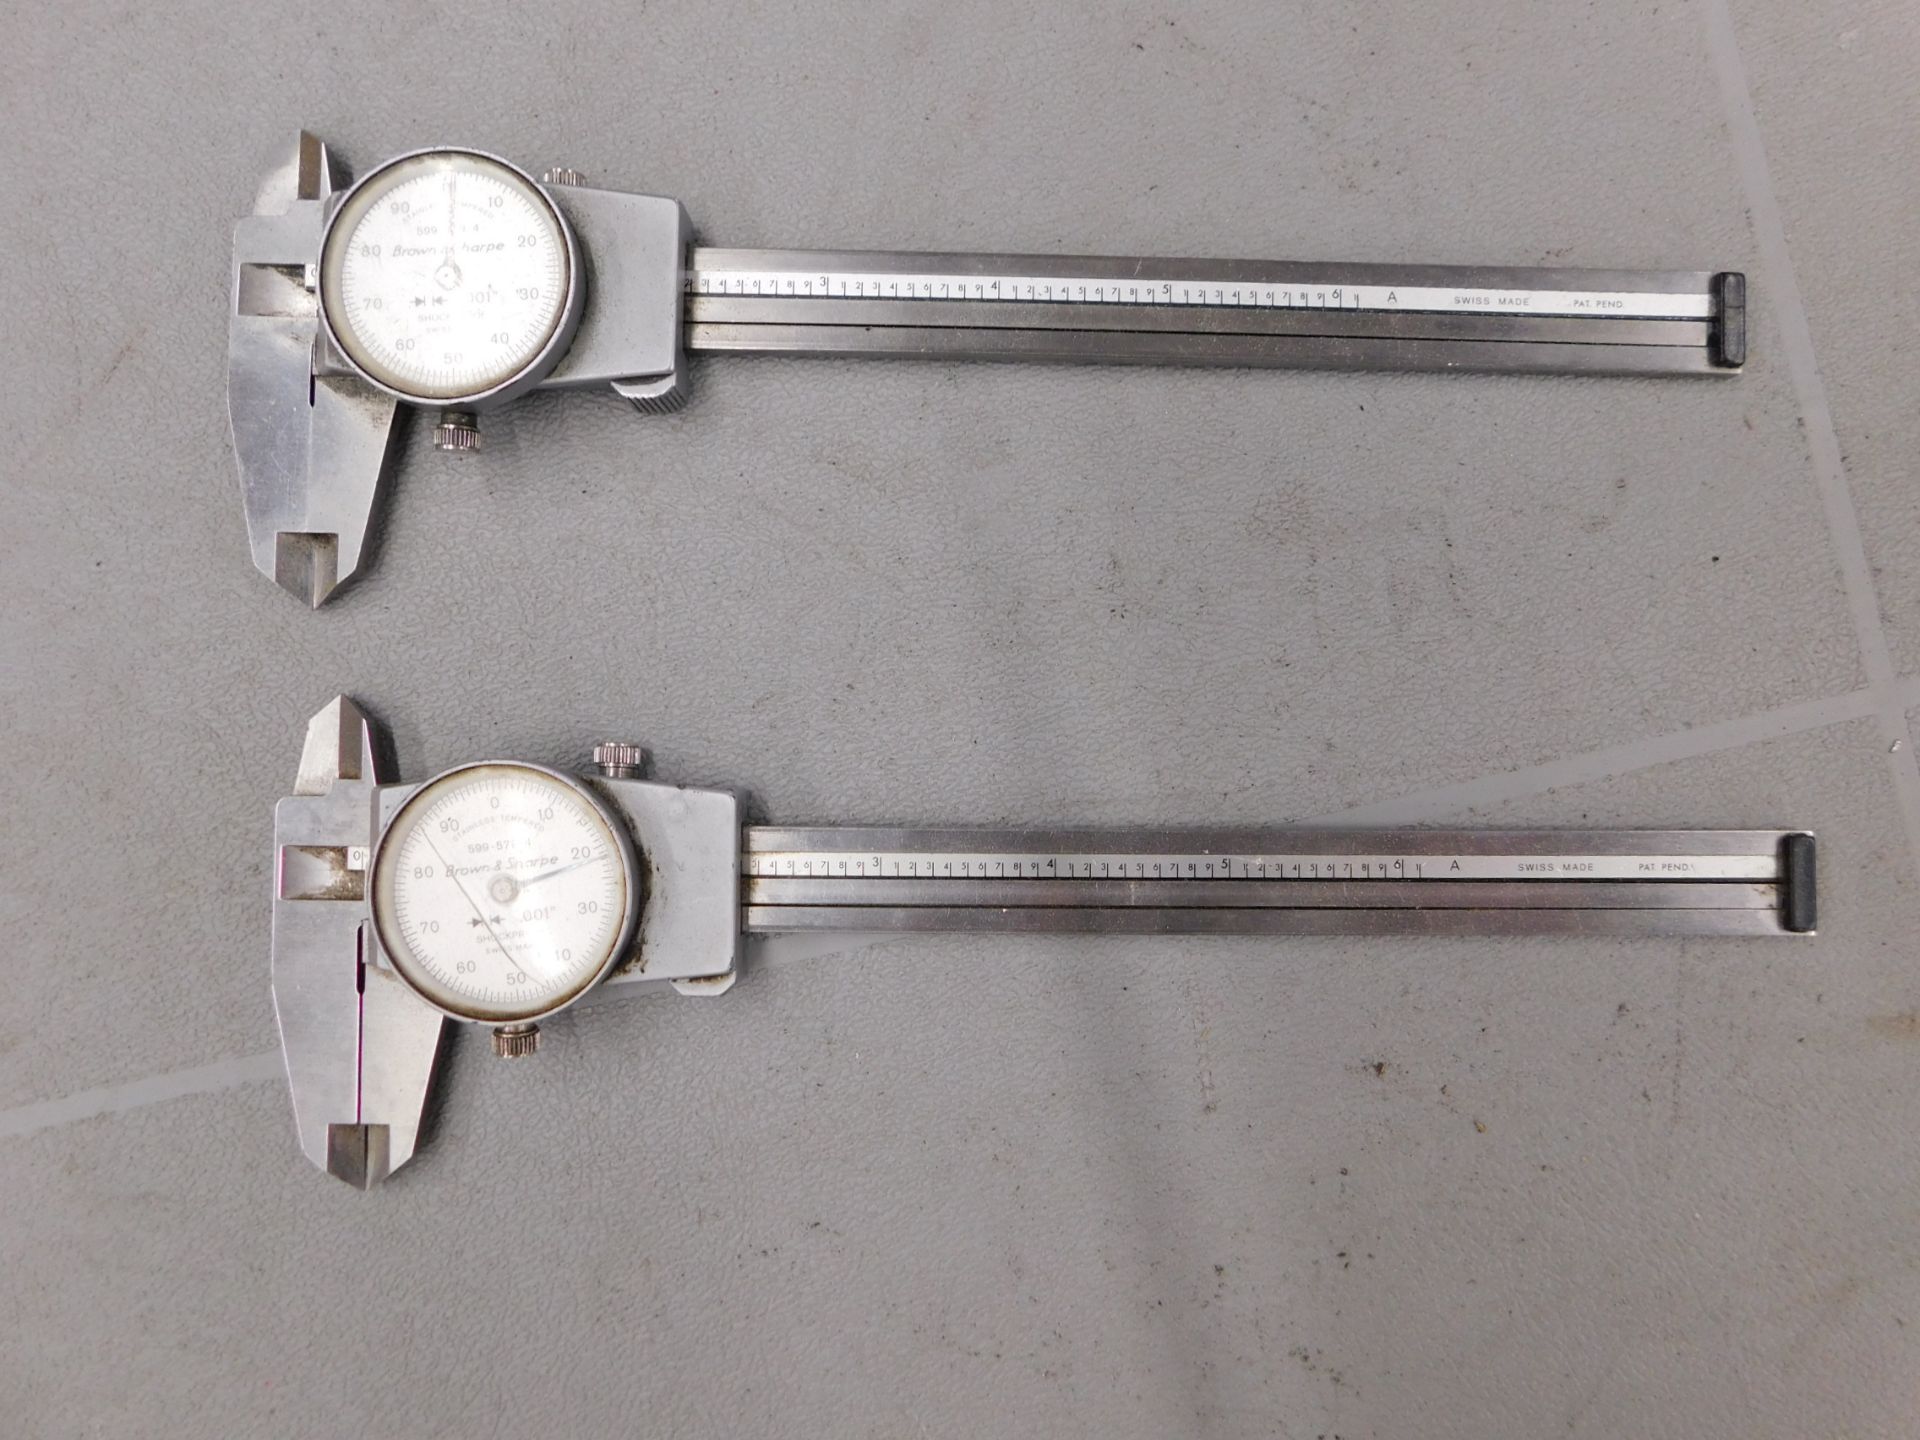 (2) 6 Inch Dial Calipers